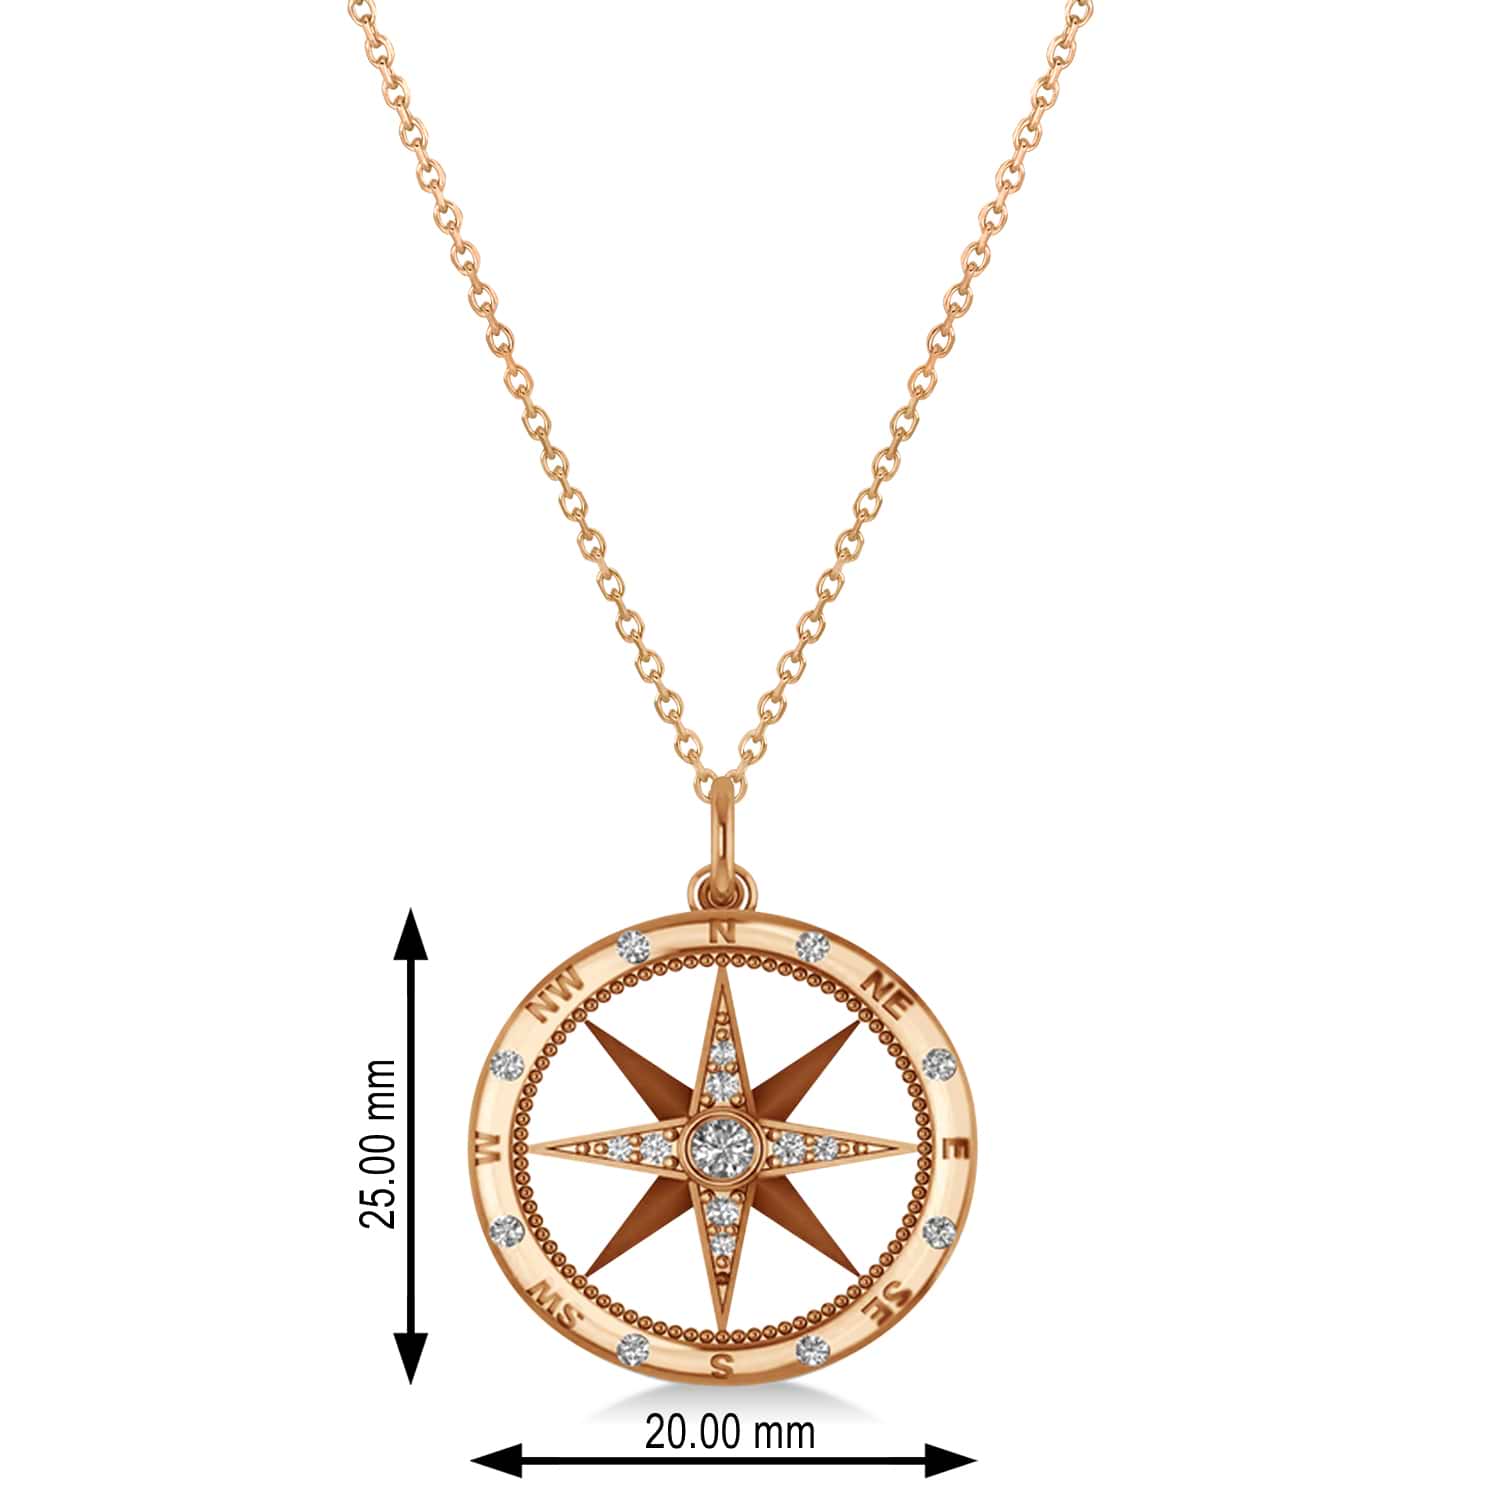 Compass Necklace Pendant Diamond Accented 18k Rose Gold (0.19ct)